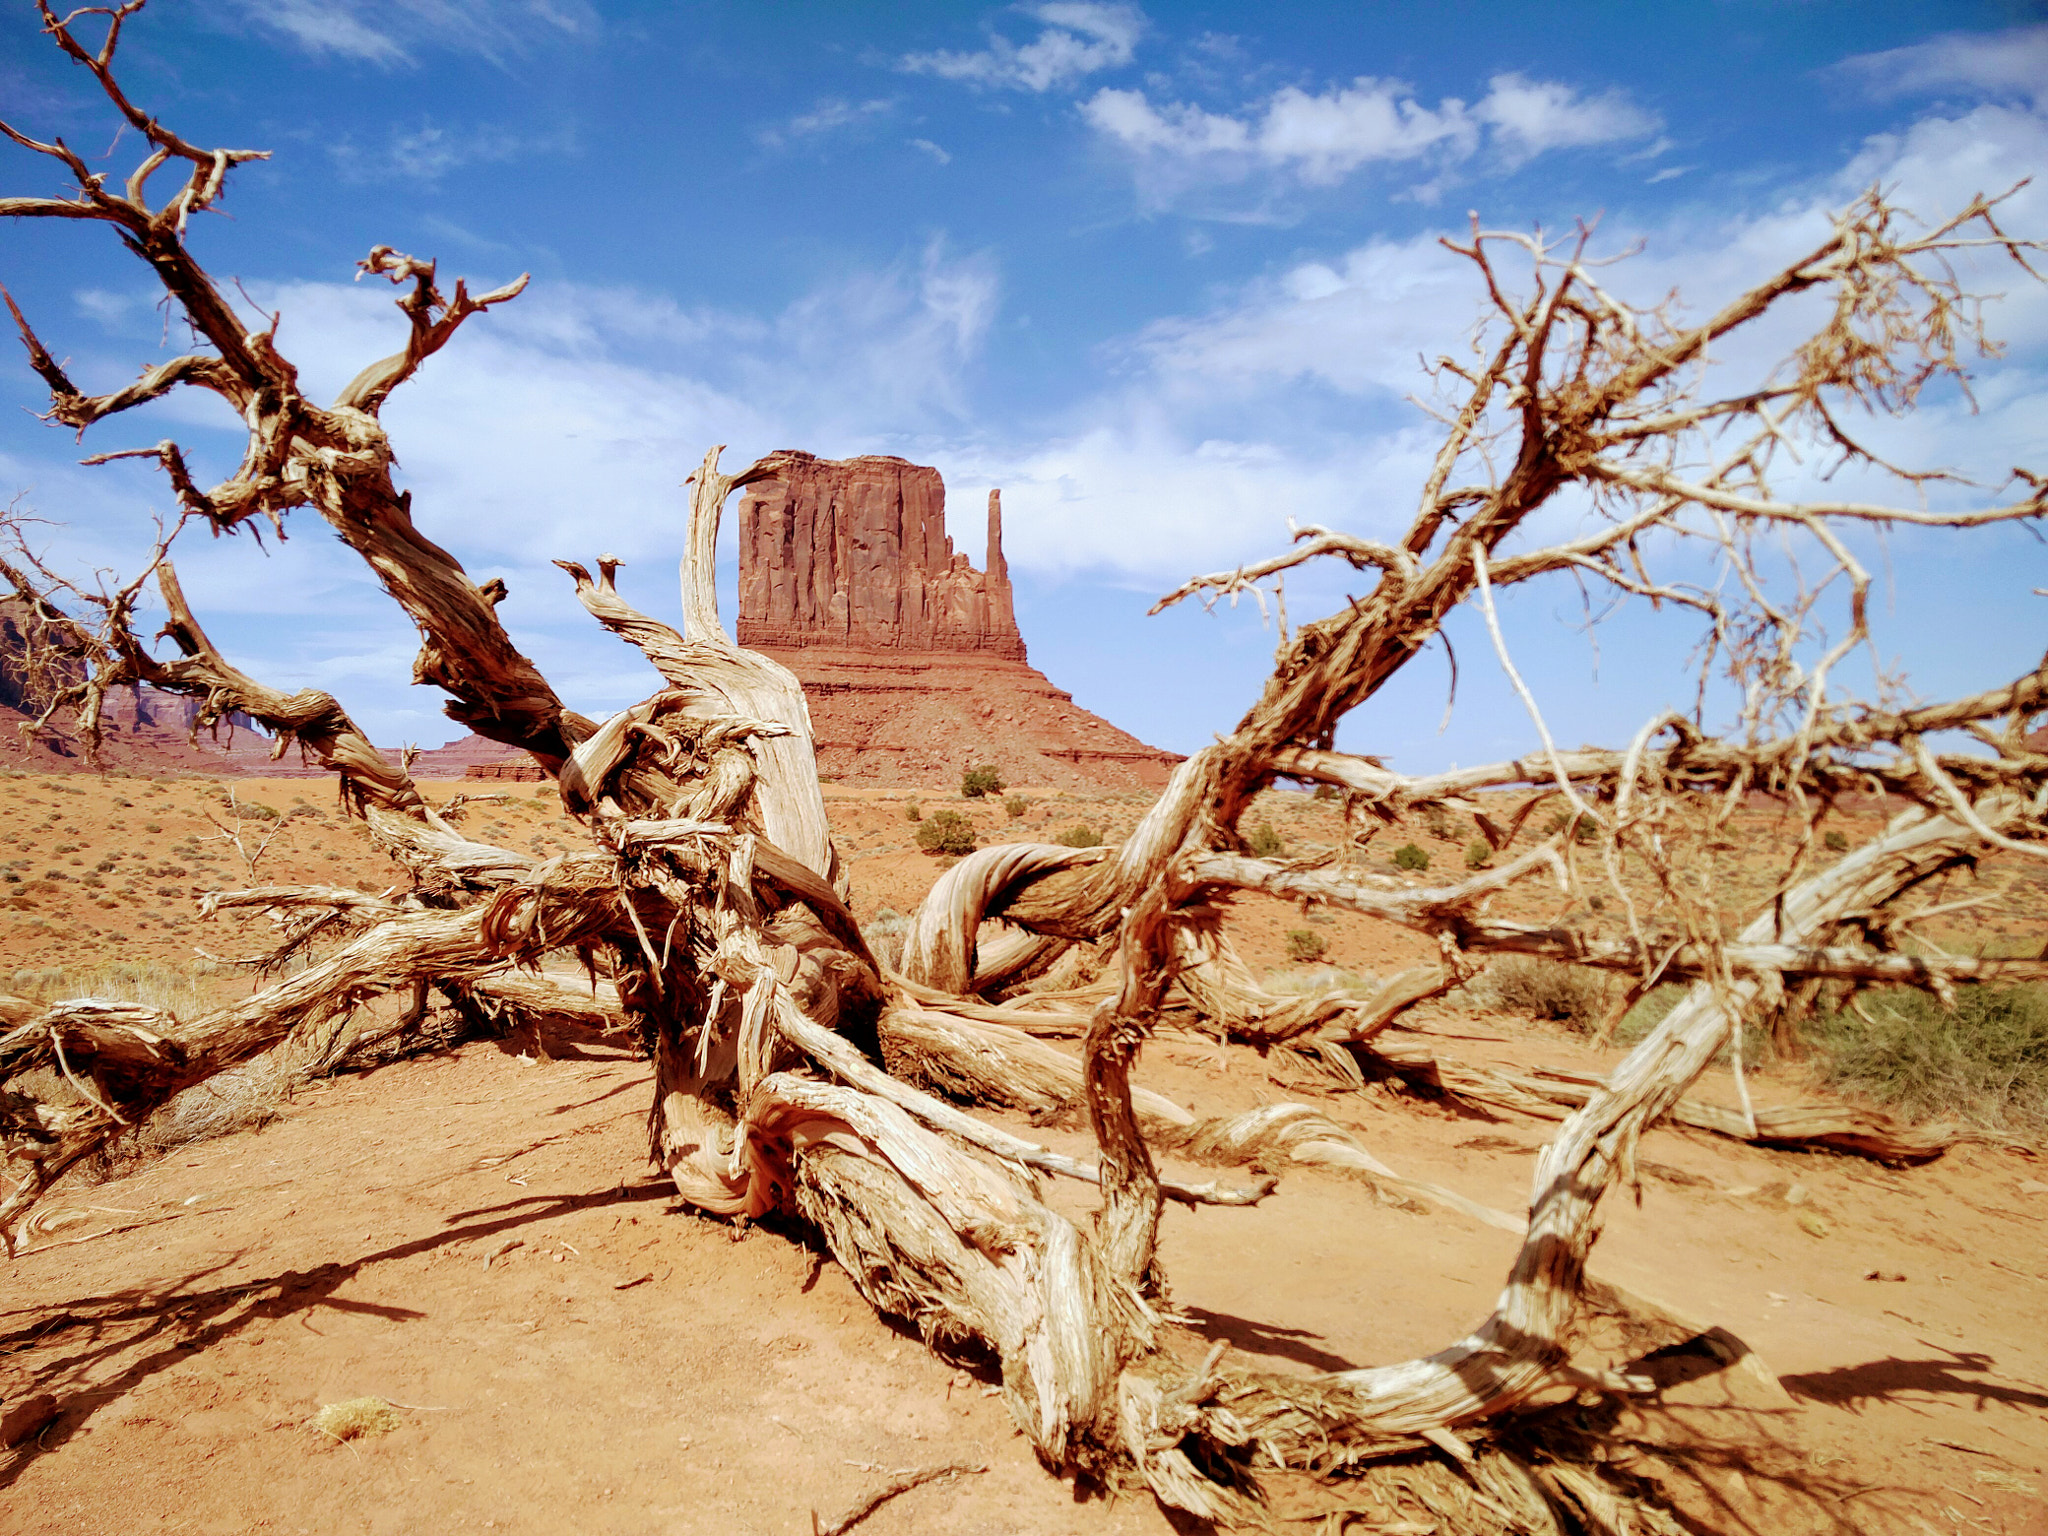 OnePlus 2 sample photo. Navajo's land silence of the golden sand photography